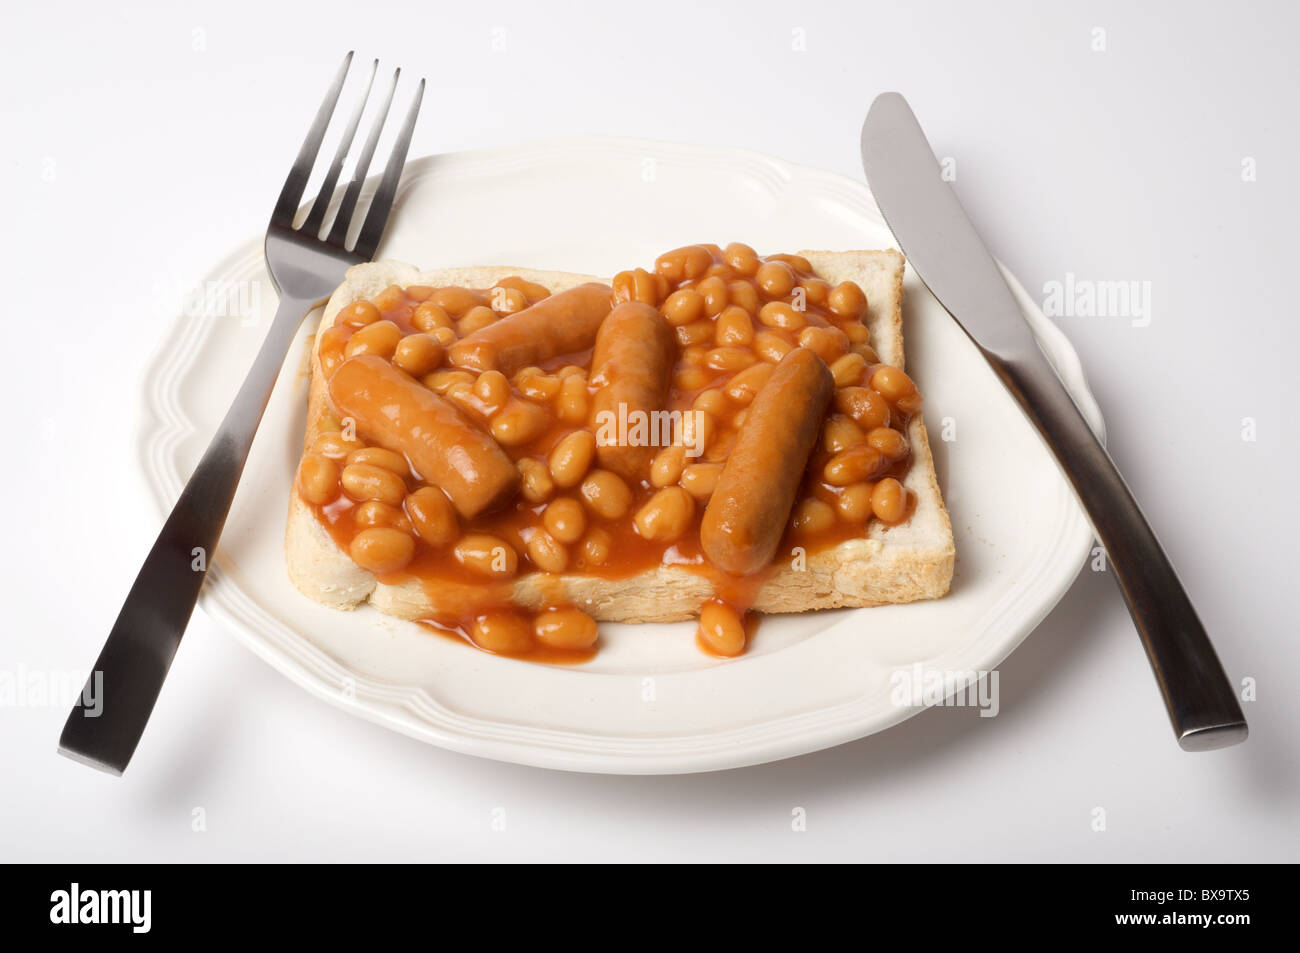 Heinz baked beans and pork sausages on toast Stock Photo